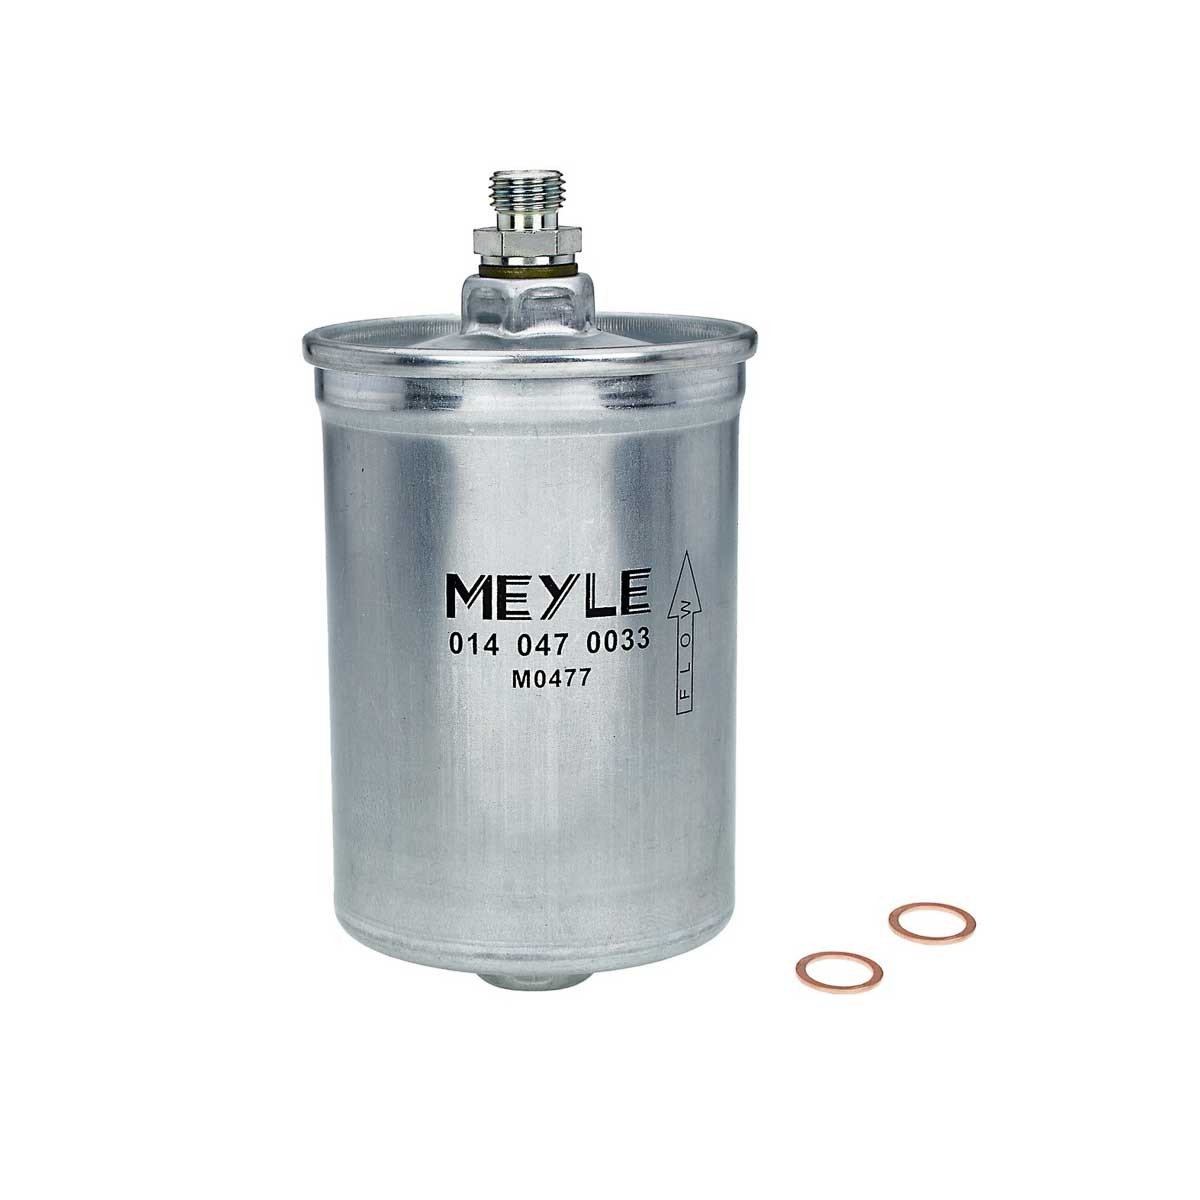 MFF0009 MEYLE Spin-on Filter, ORIGINAL Quality Height: 144,5mm Inline fuel filter 014 047 0033 buy